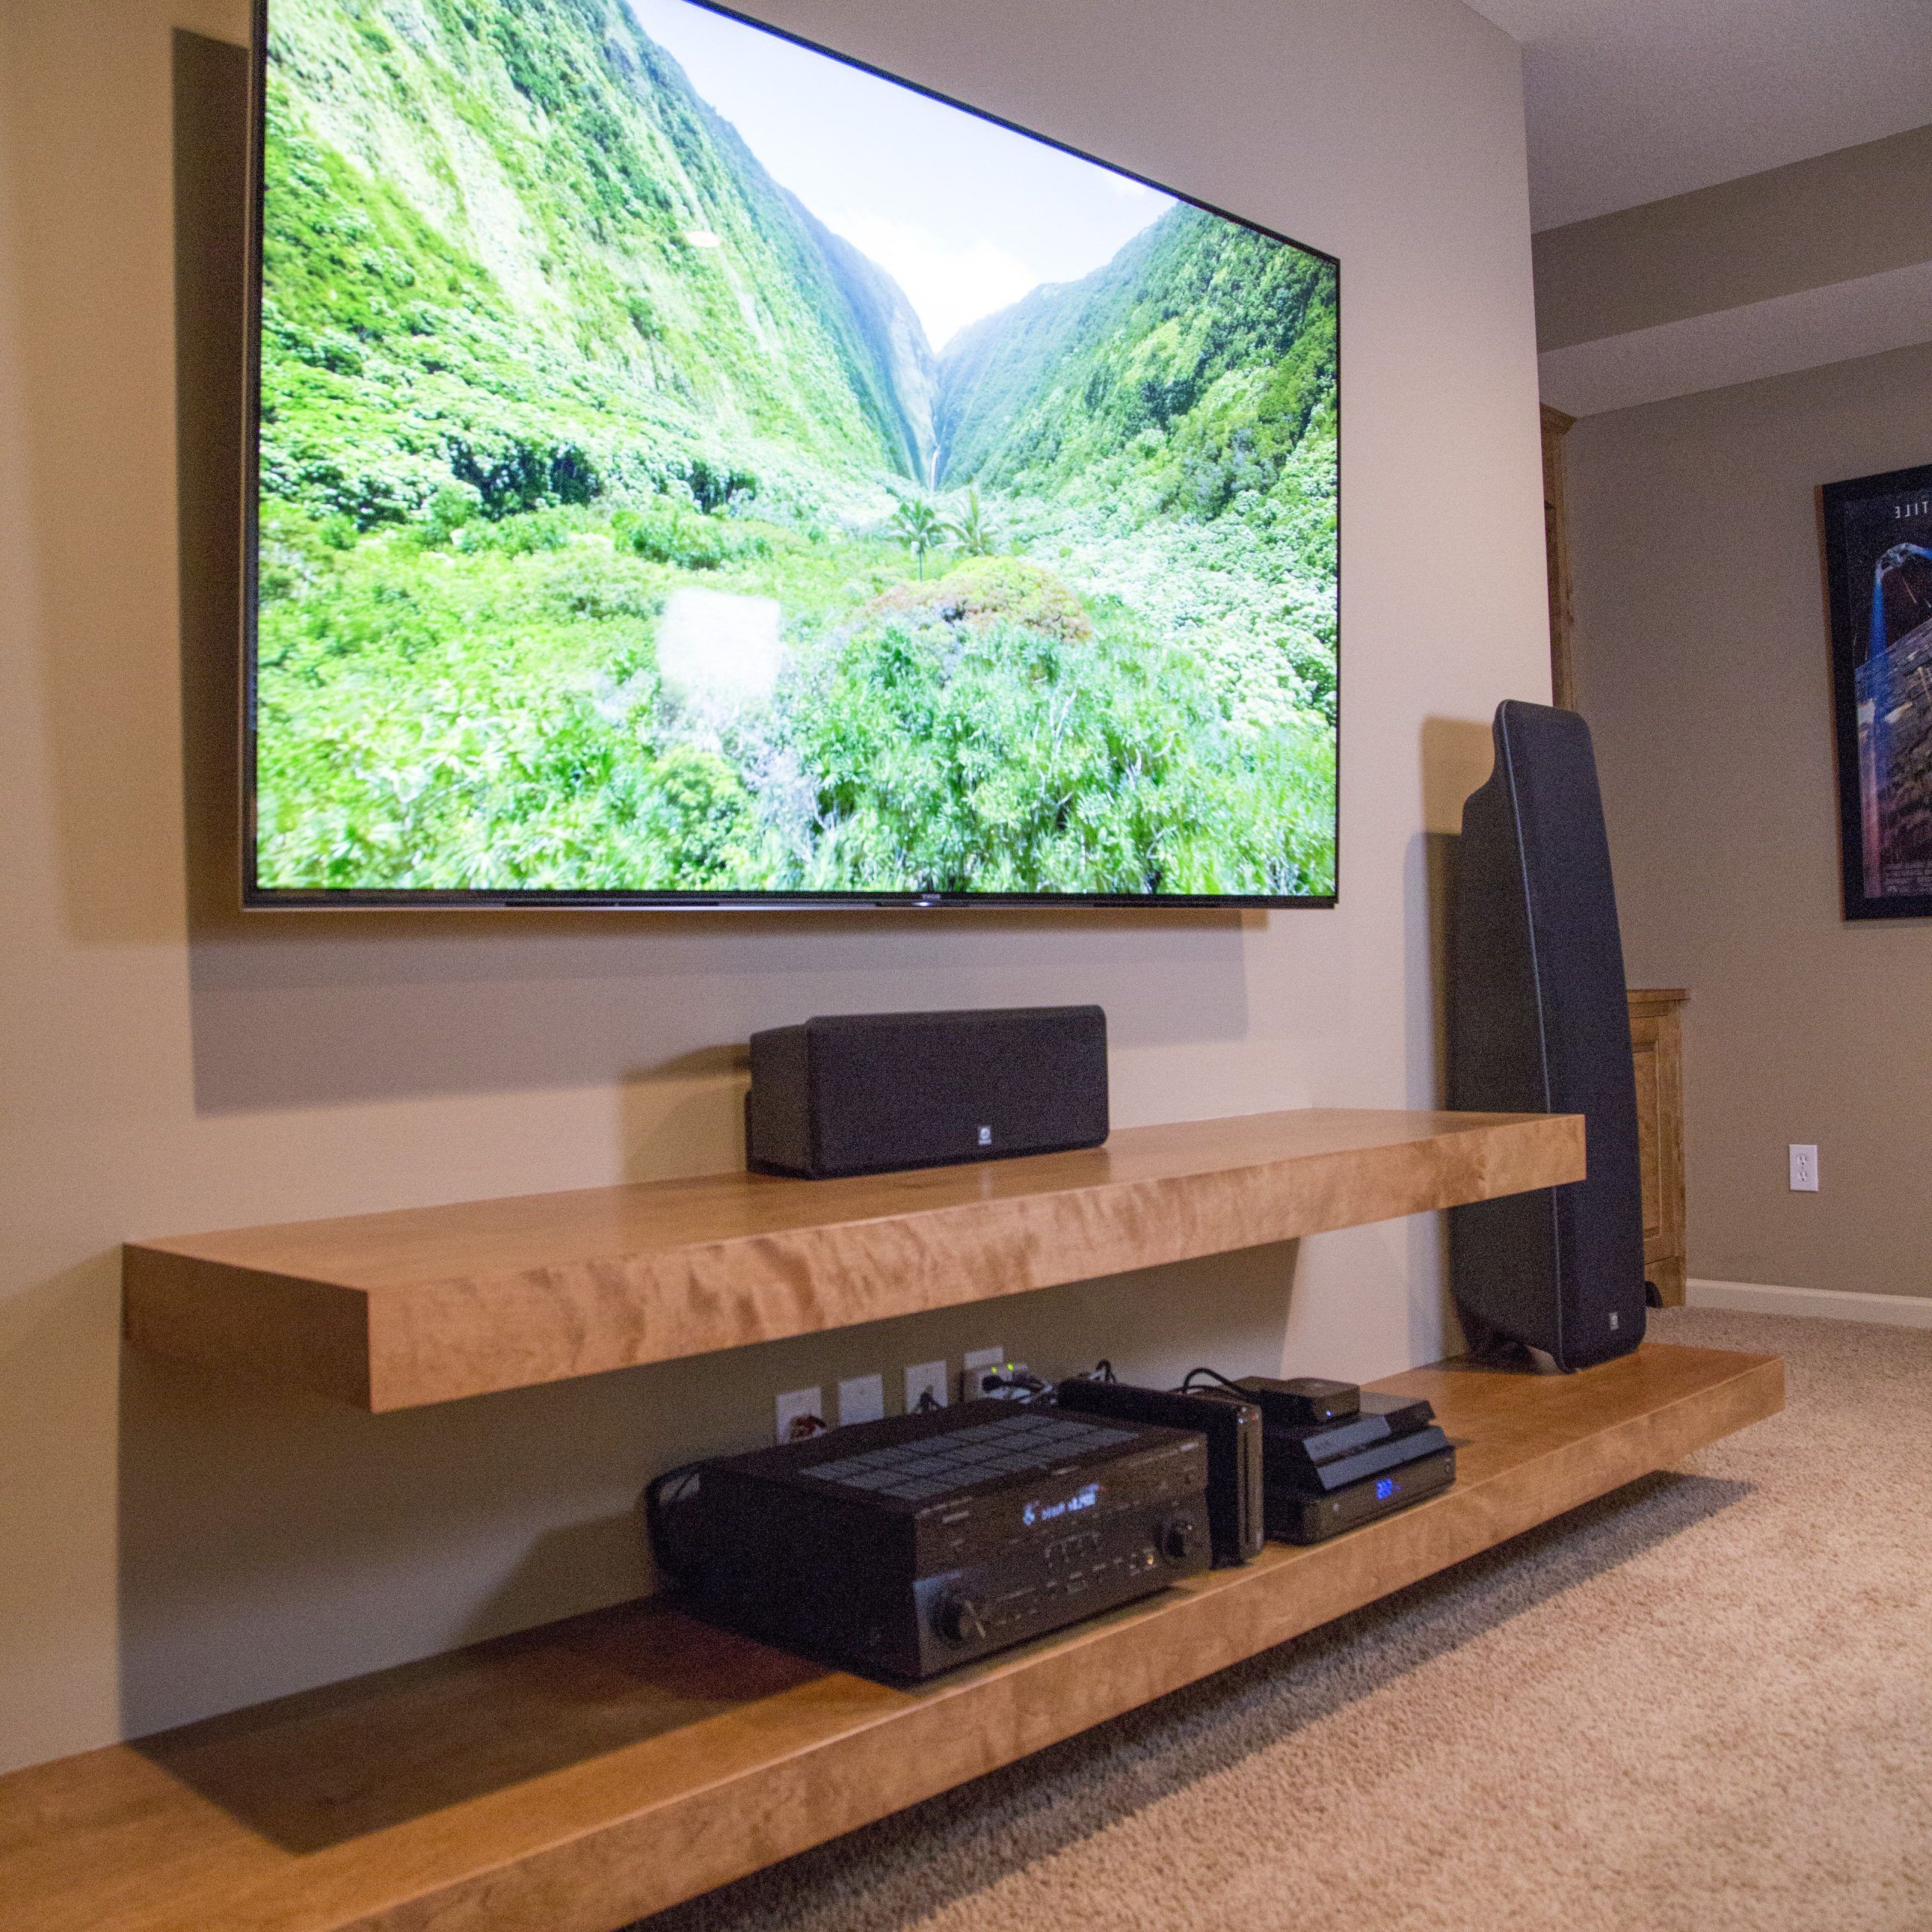 Floating Shelves Entertainment Center | Floating Shelves Living Room,  Living Room Tv Wall, Living Room Decor Throughout Floating Stands For Tvs (Gallery 10 of 20)